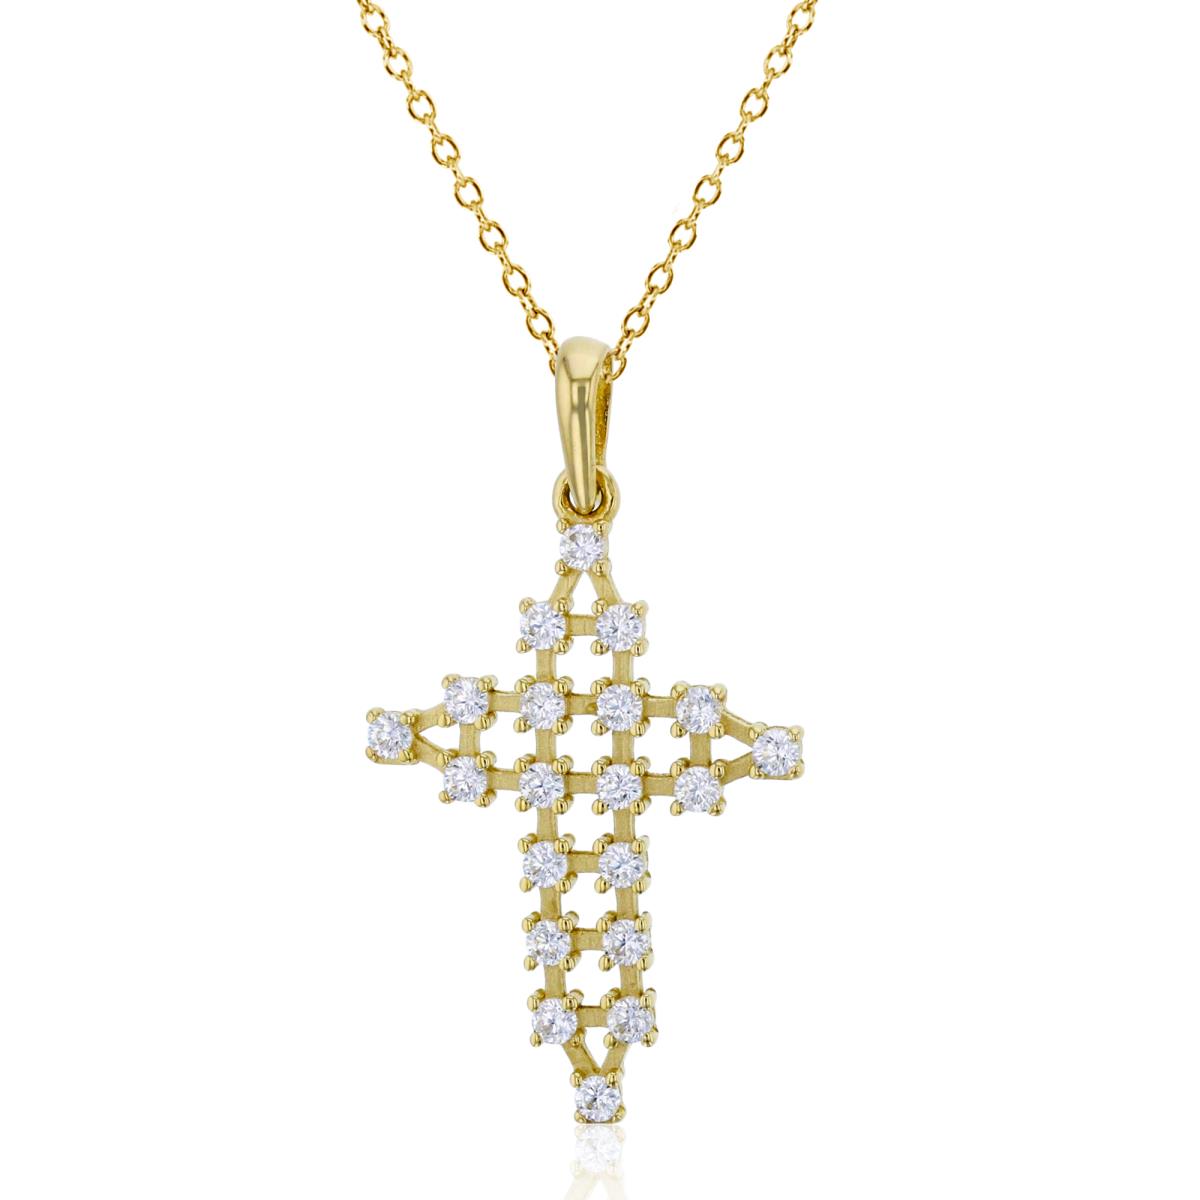 10K Yellow Gold 30x16mm Basketweave Pave Cross 18" Necklace